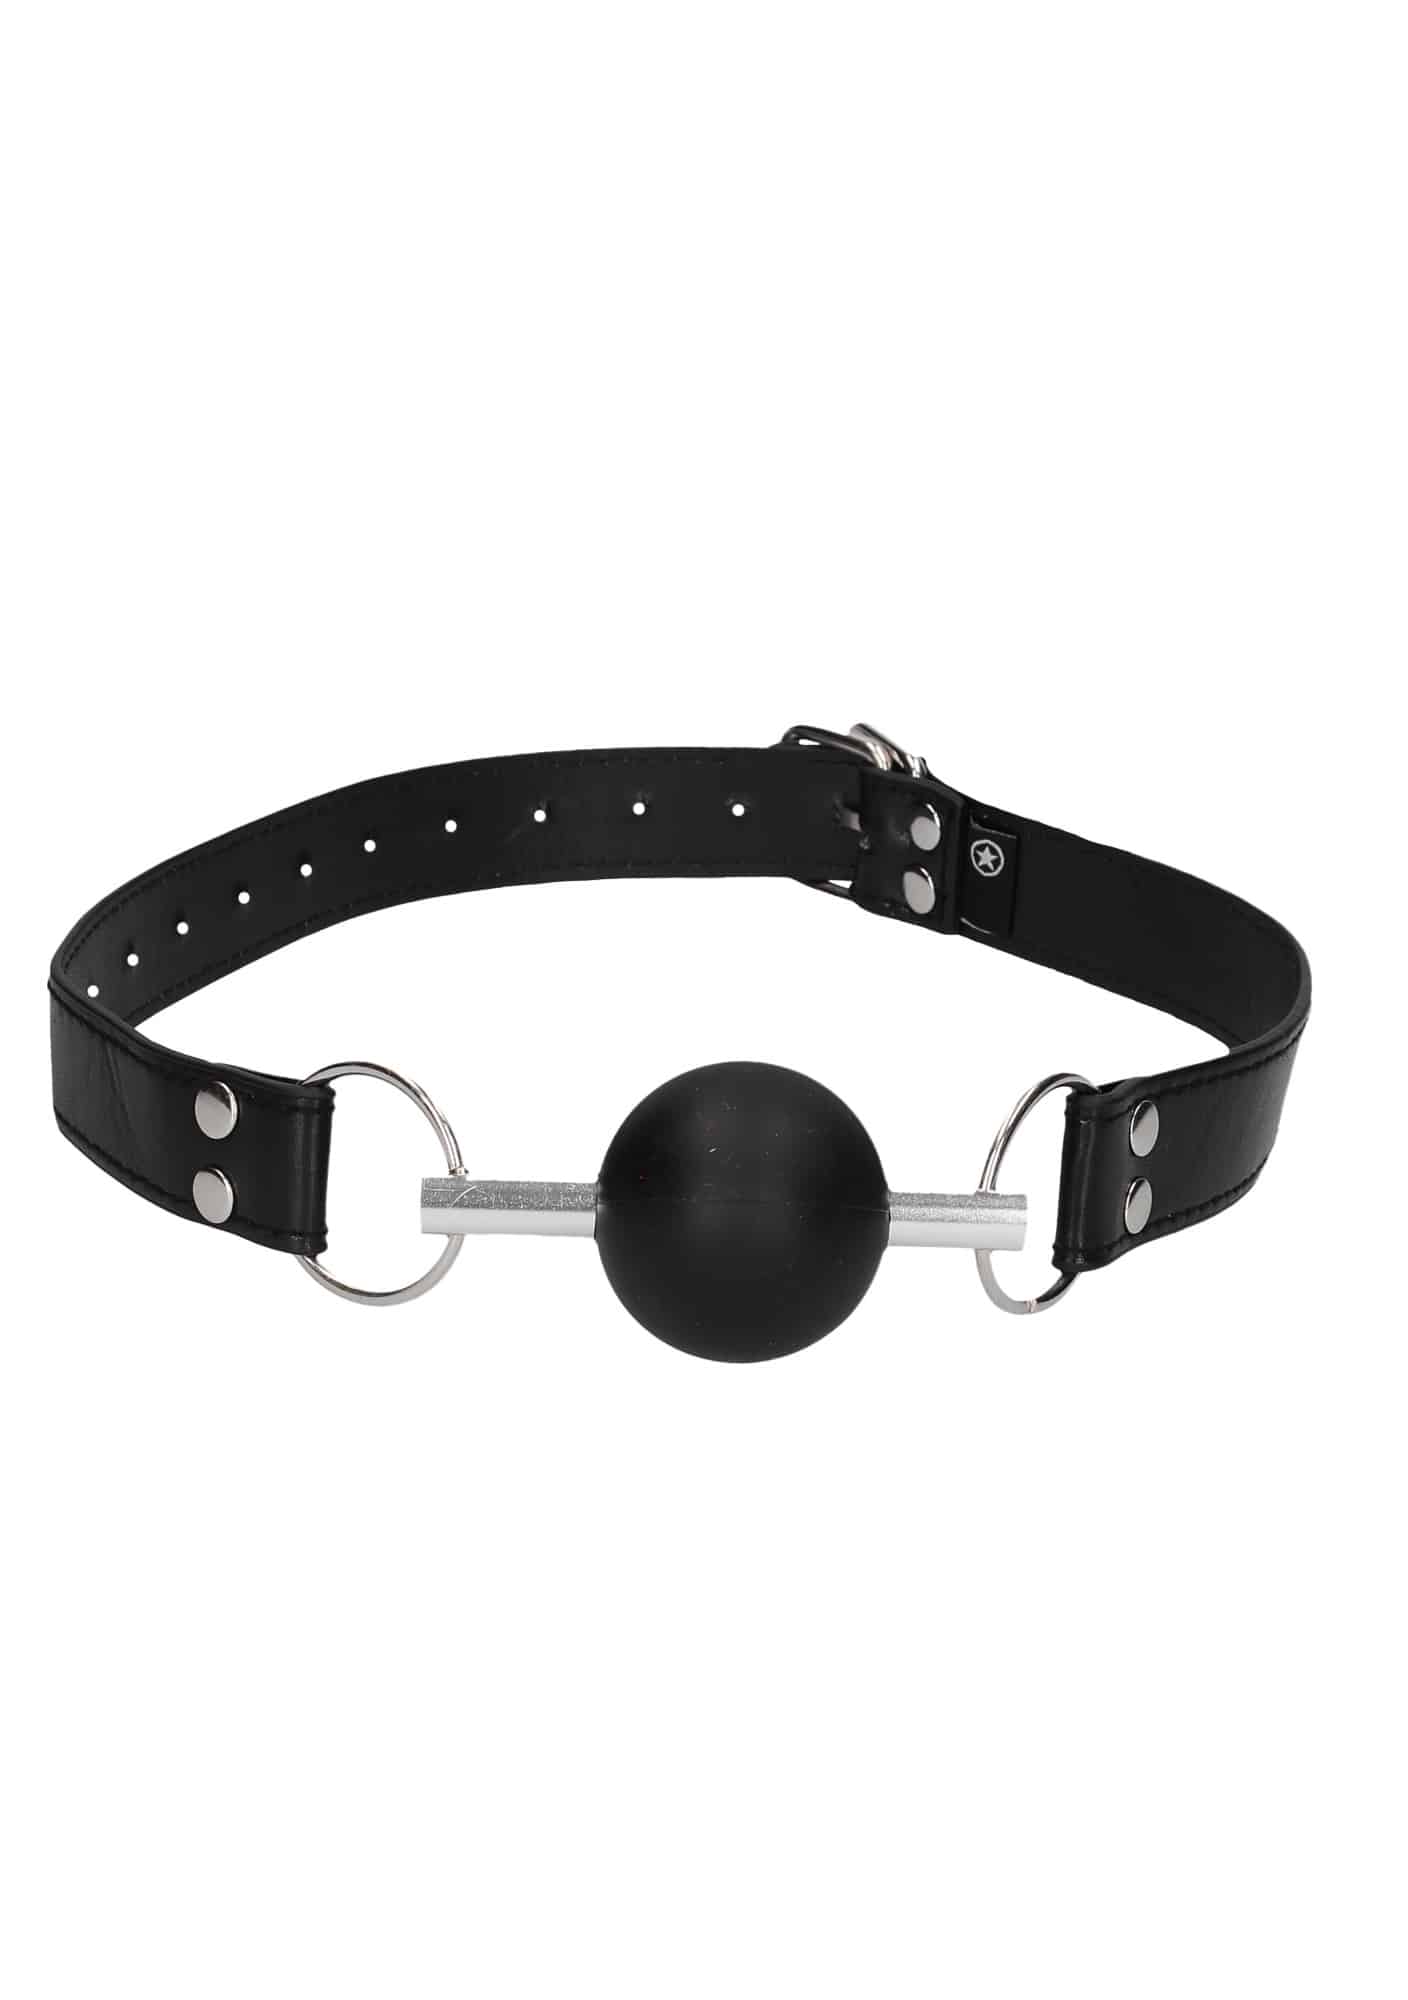 Solid Ball Gag With Bonded Leather Straps